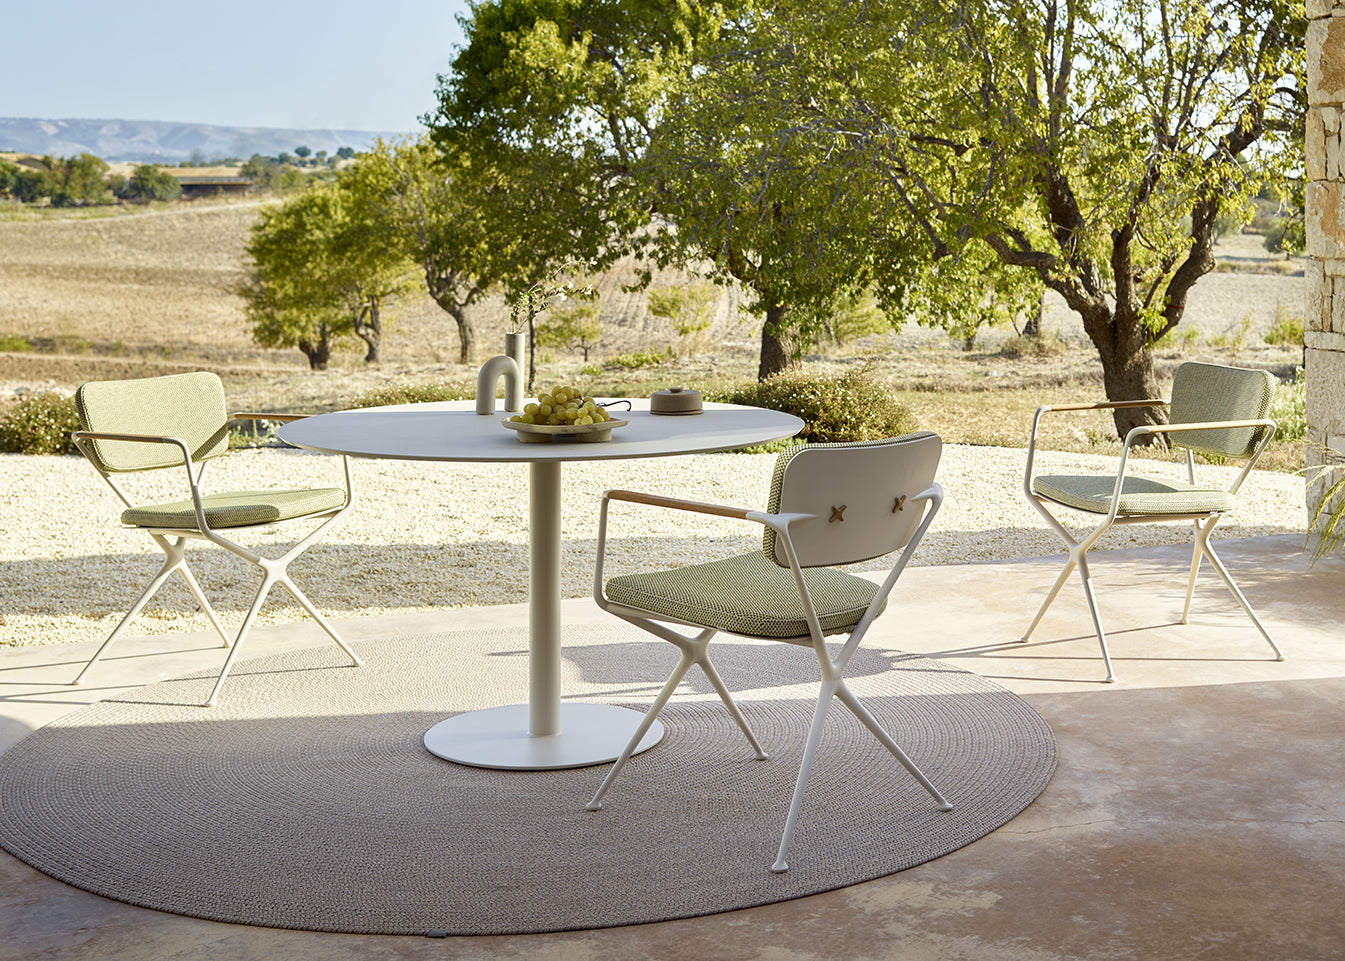 Luxury teak outdoor furniture, with powder-coated frame and luxury scatter cushions.